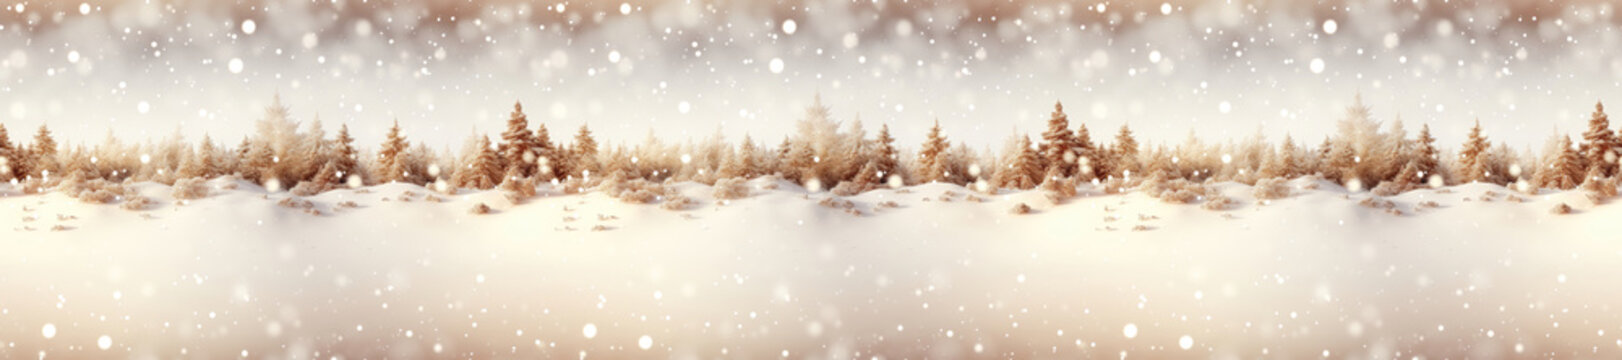 Seamless. A wide format winter background image featuring a serene snowy forest, capturing the tranquility and beauty of a winter landscape. Photorealistic illustration